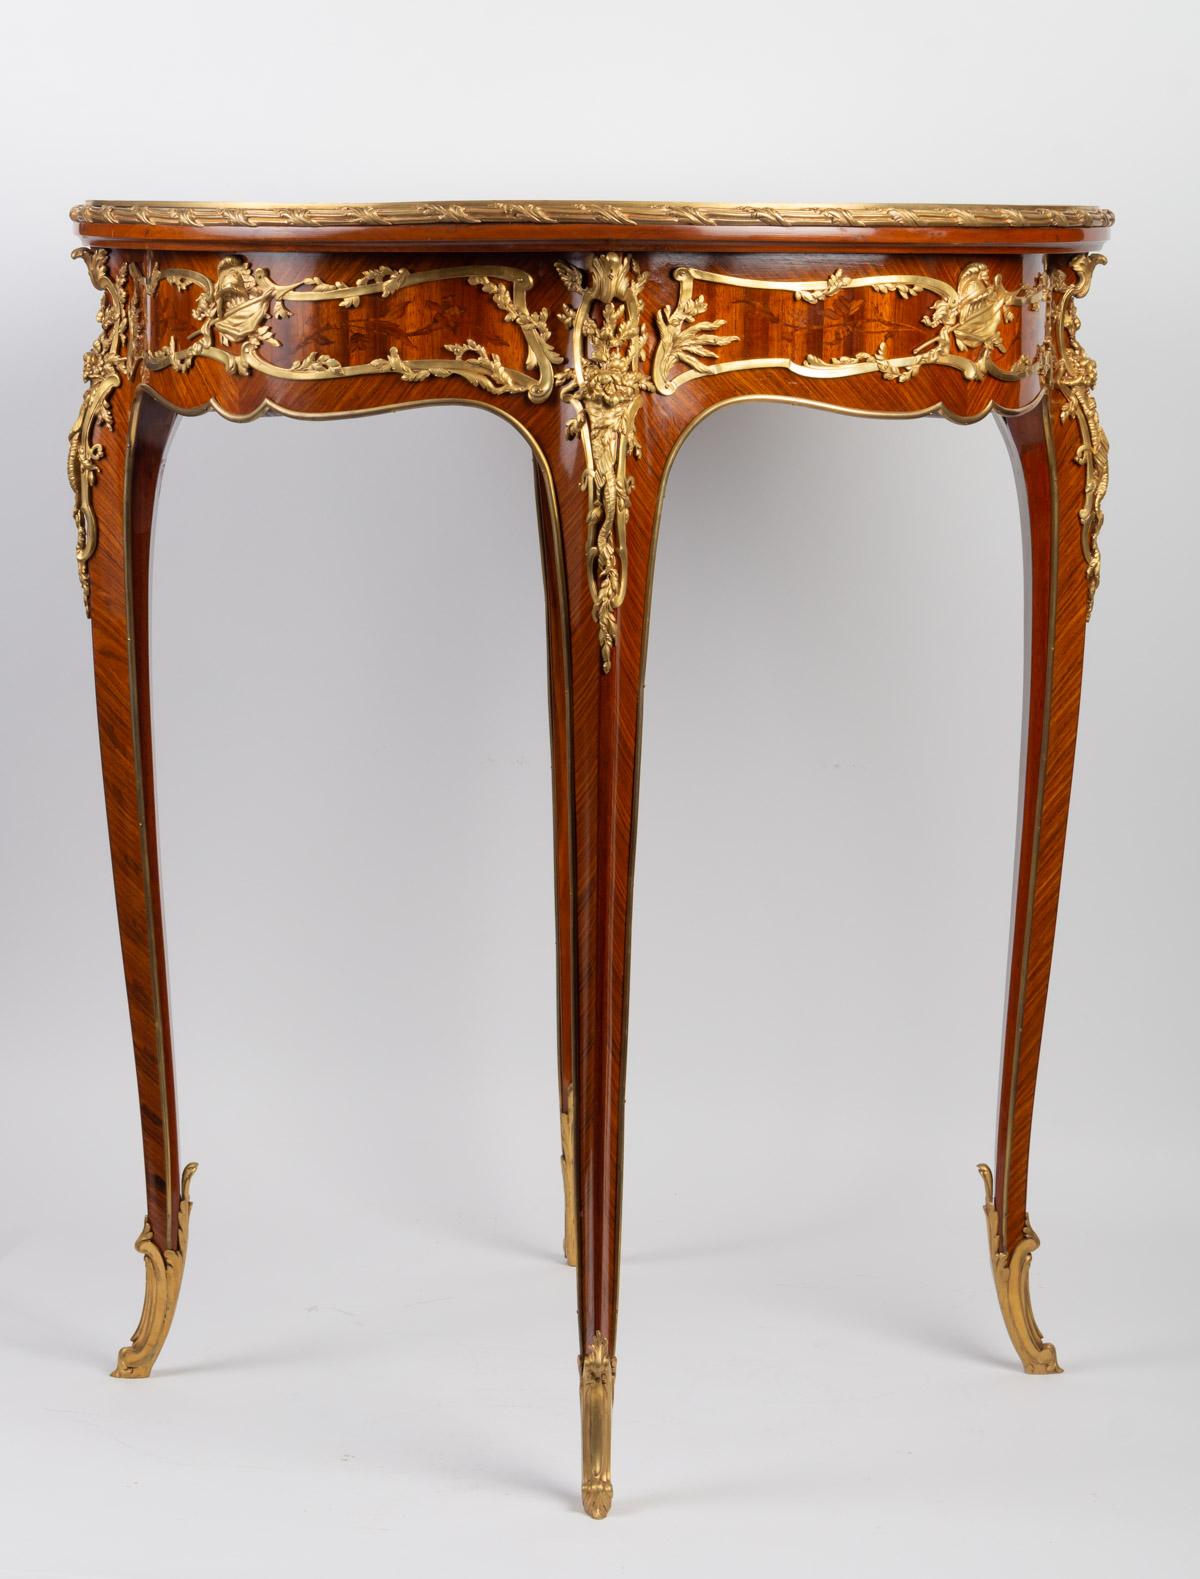 19th Century Pedestal Table in Marquetry and Gilt Bronze